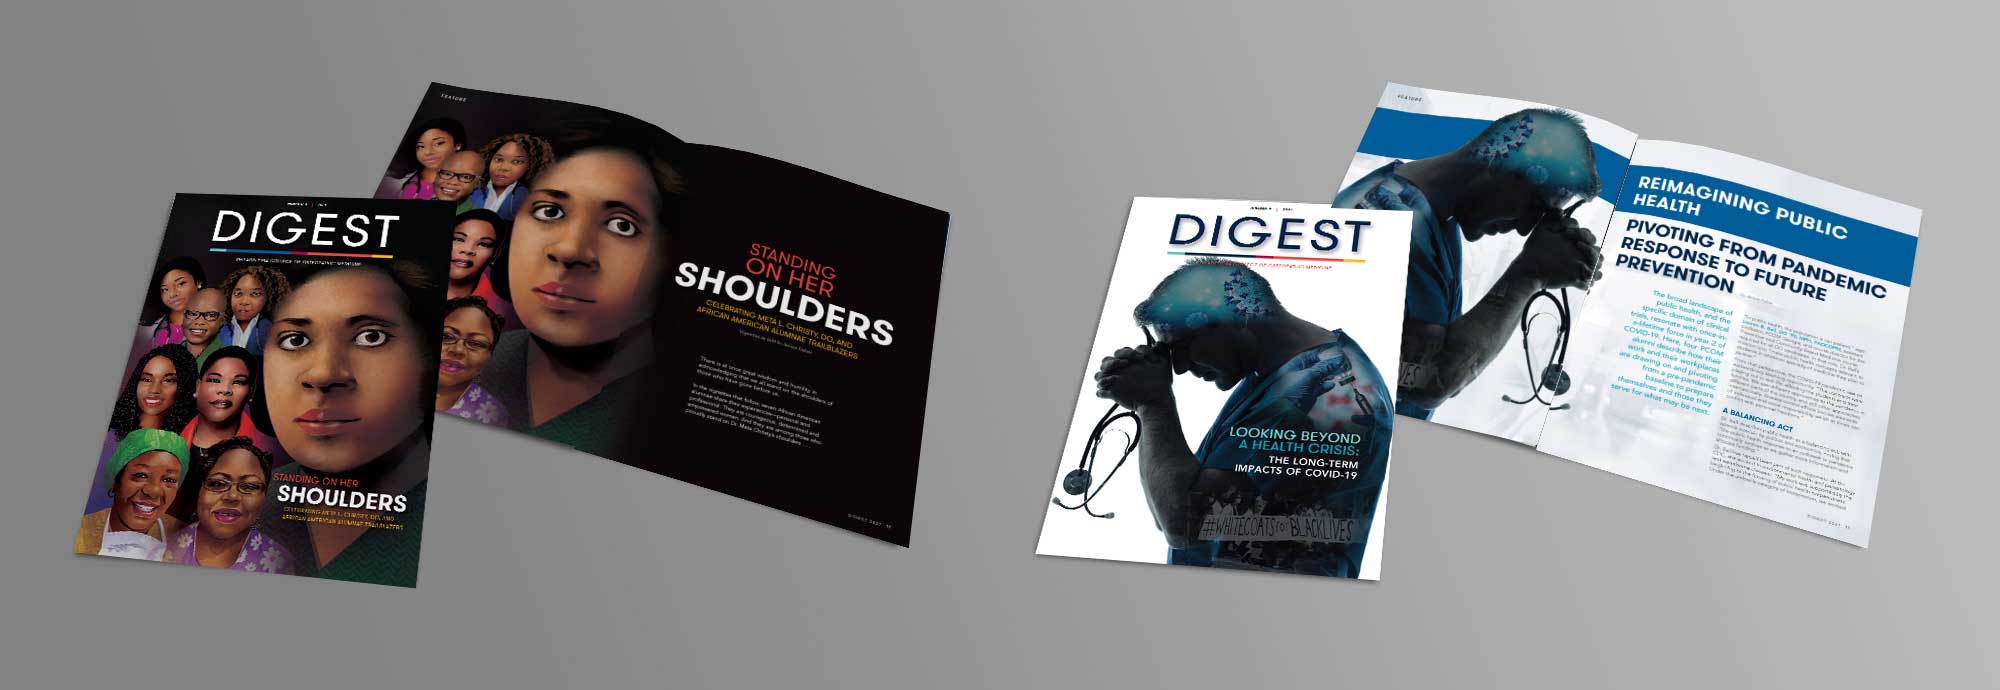 Photos of featured stories from PCOM Digest Magazine publication